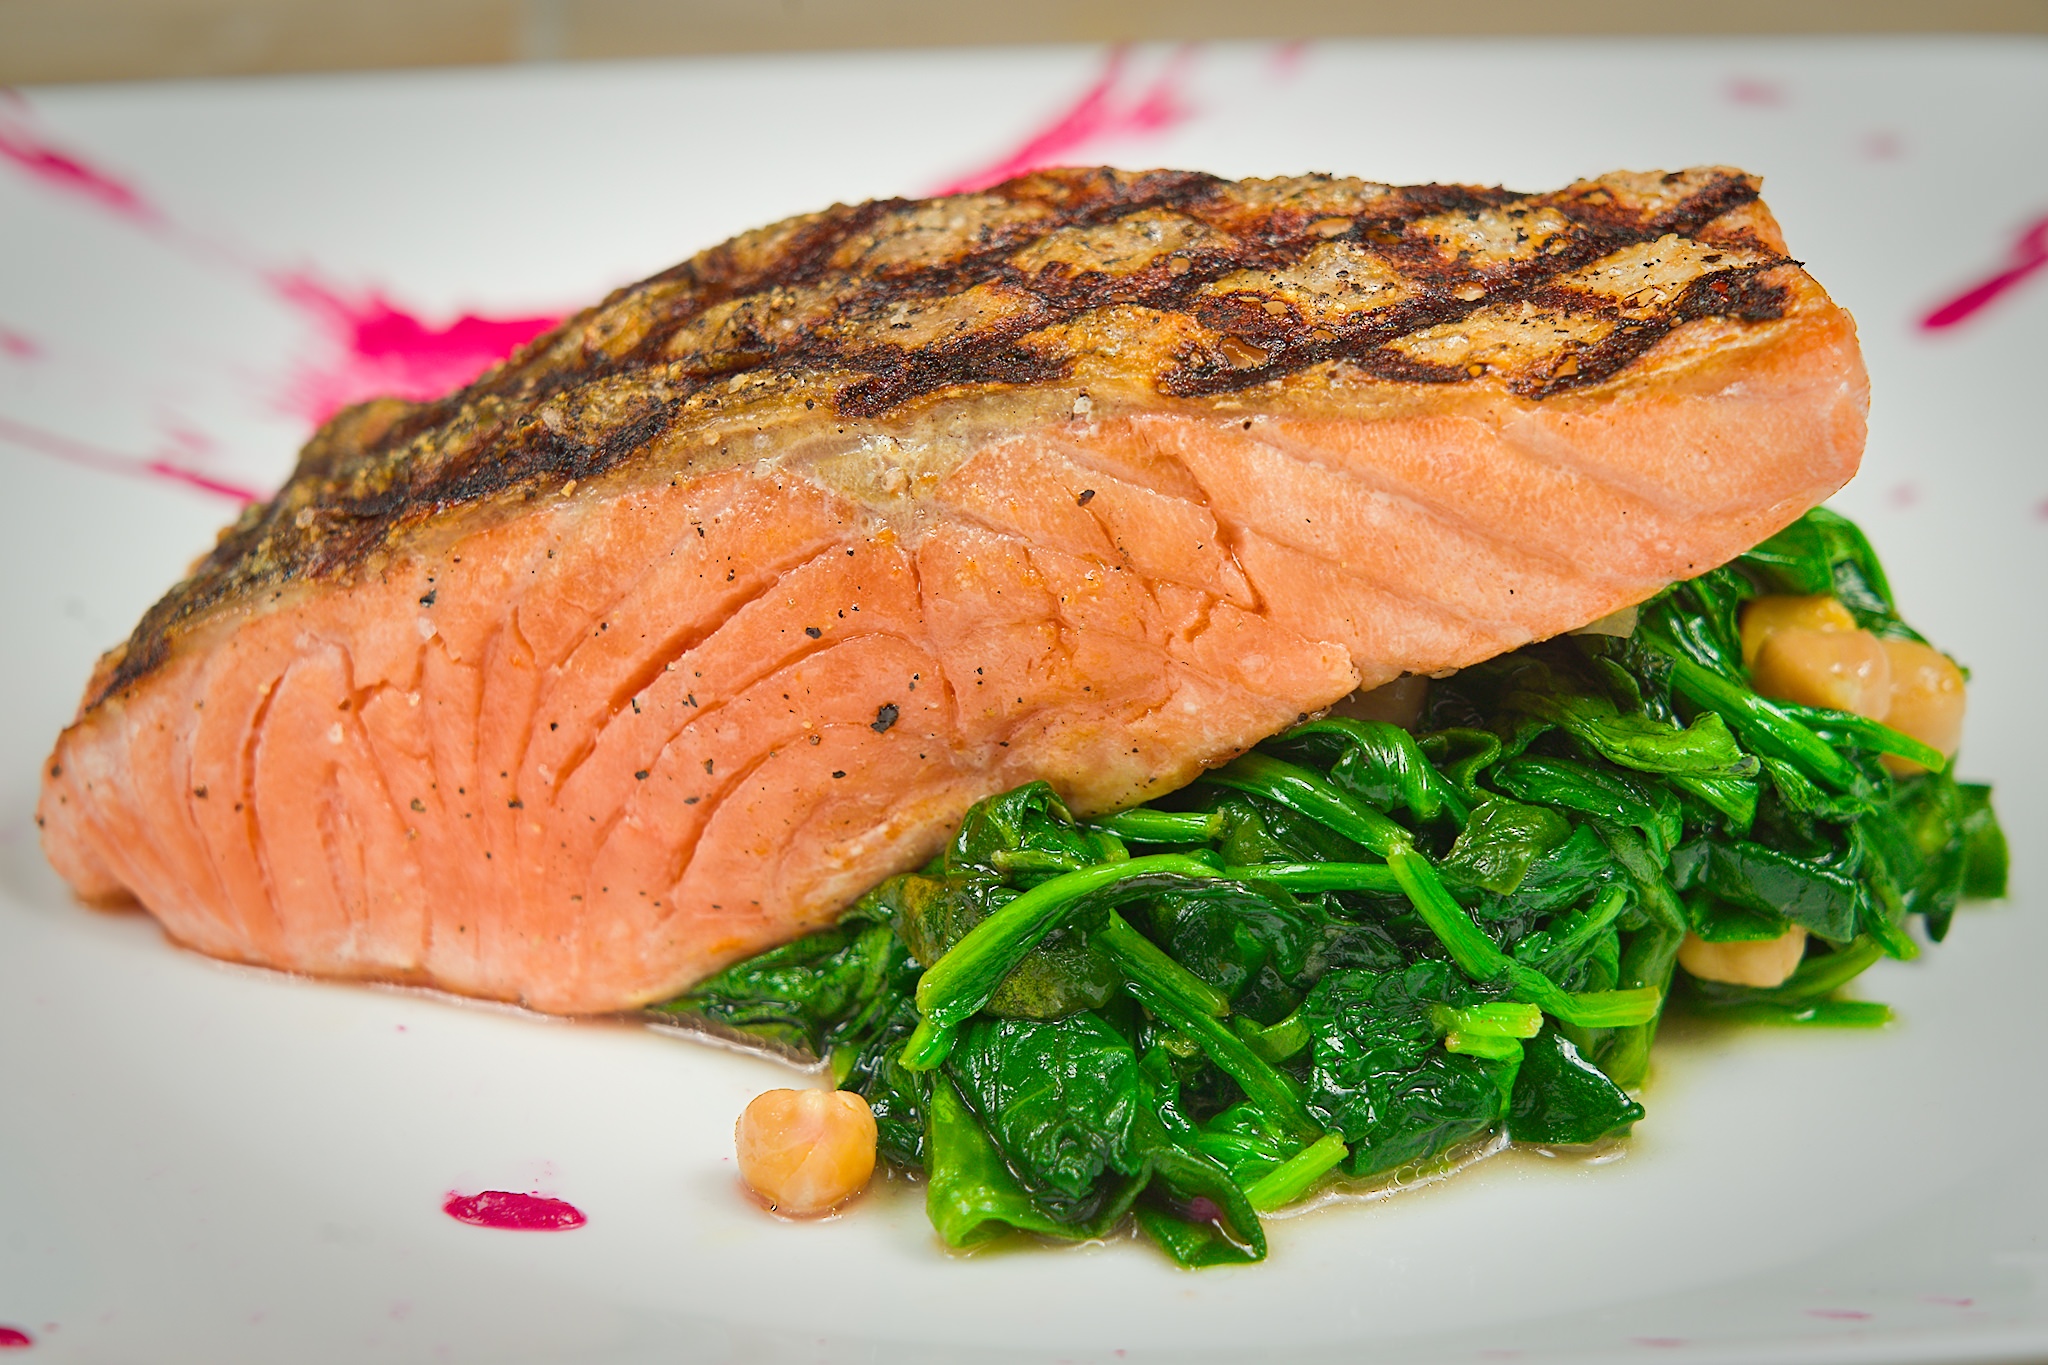 Grilled Faroe Islands Salmon over steamed spinach